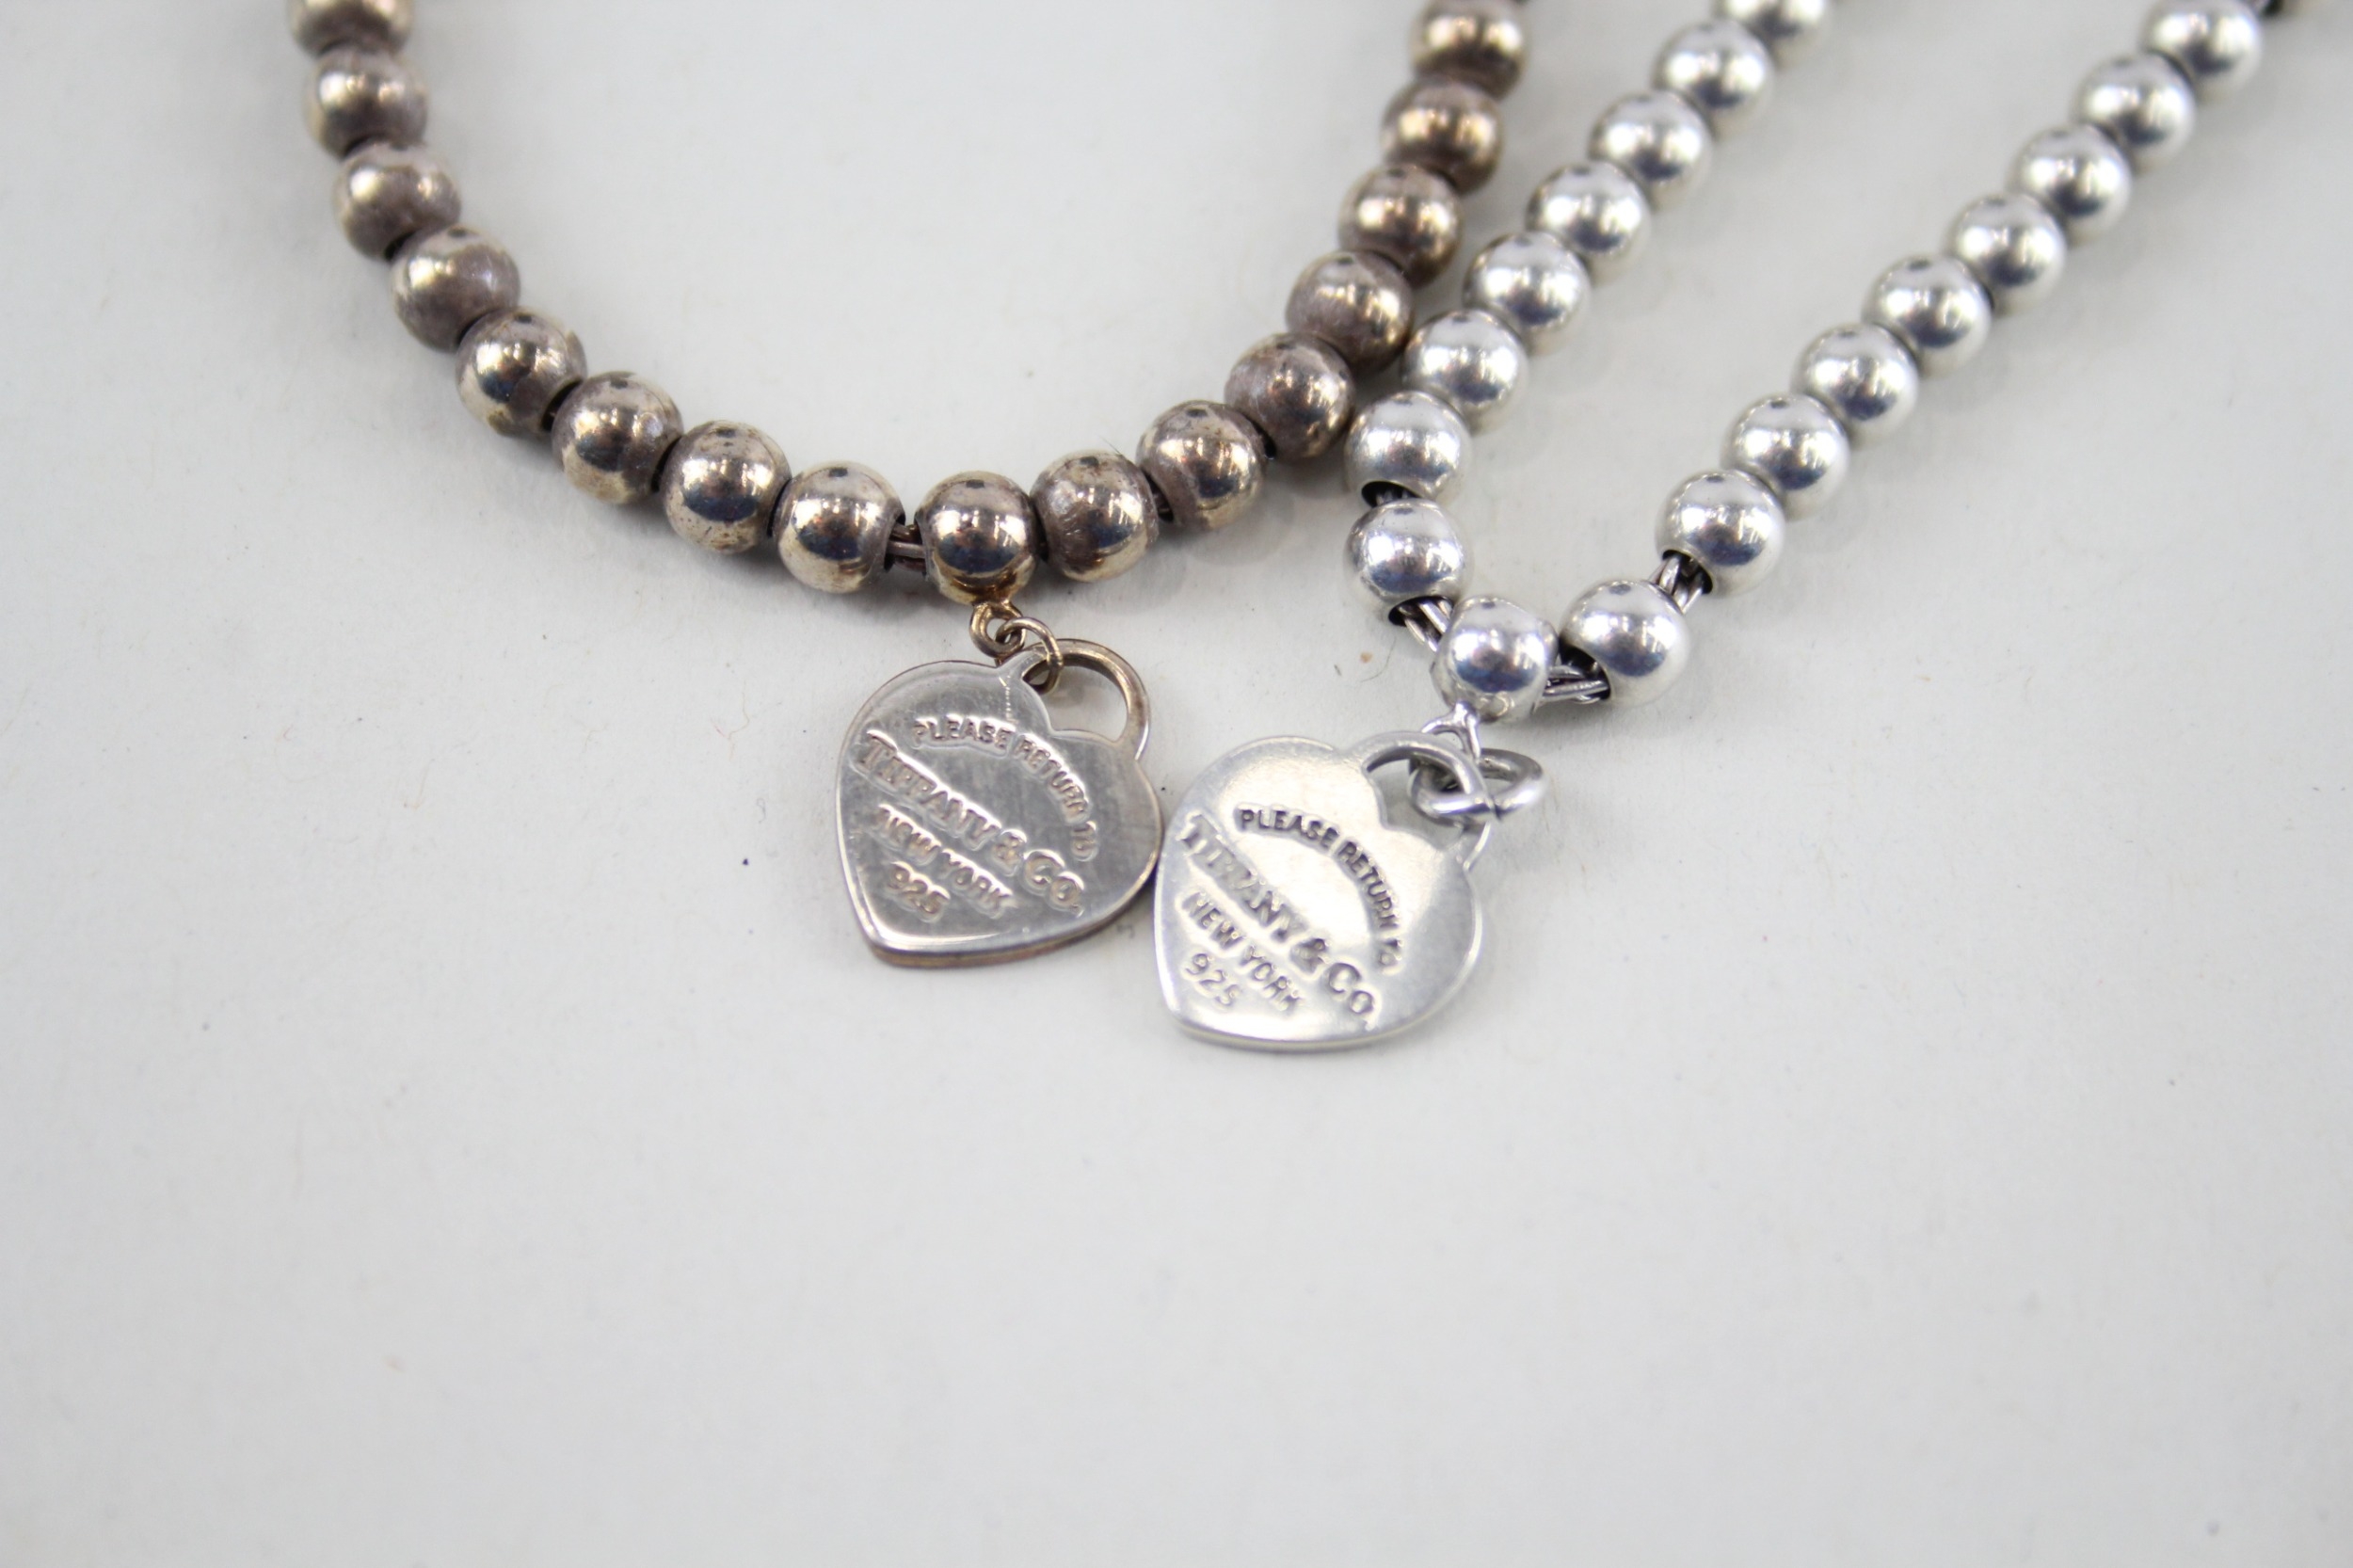 Two silver bracelets with enamel heart charms by designer Tiffany & Co (11g) - Image 7 of 7